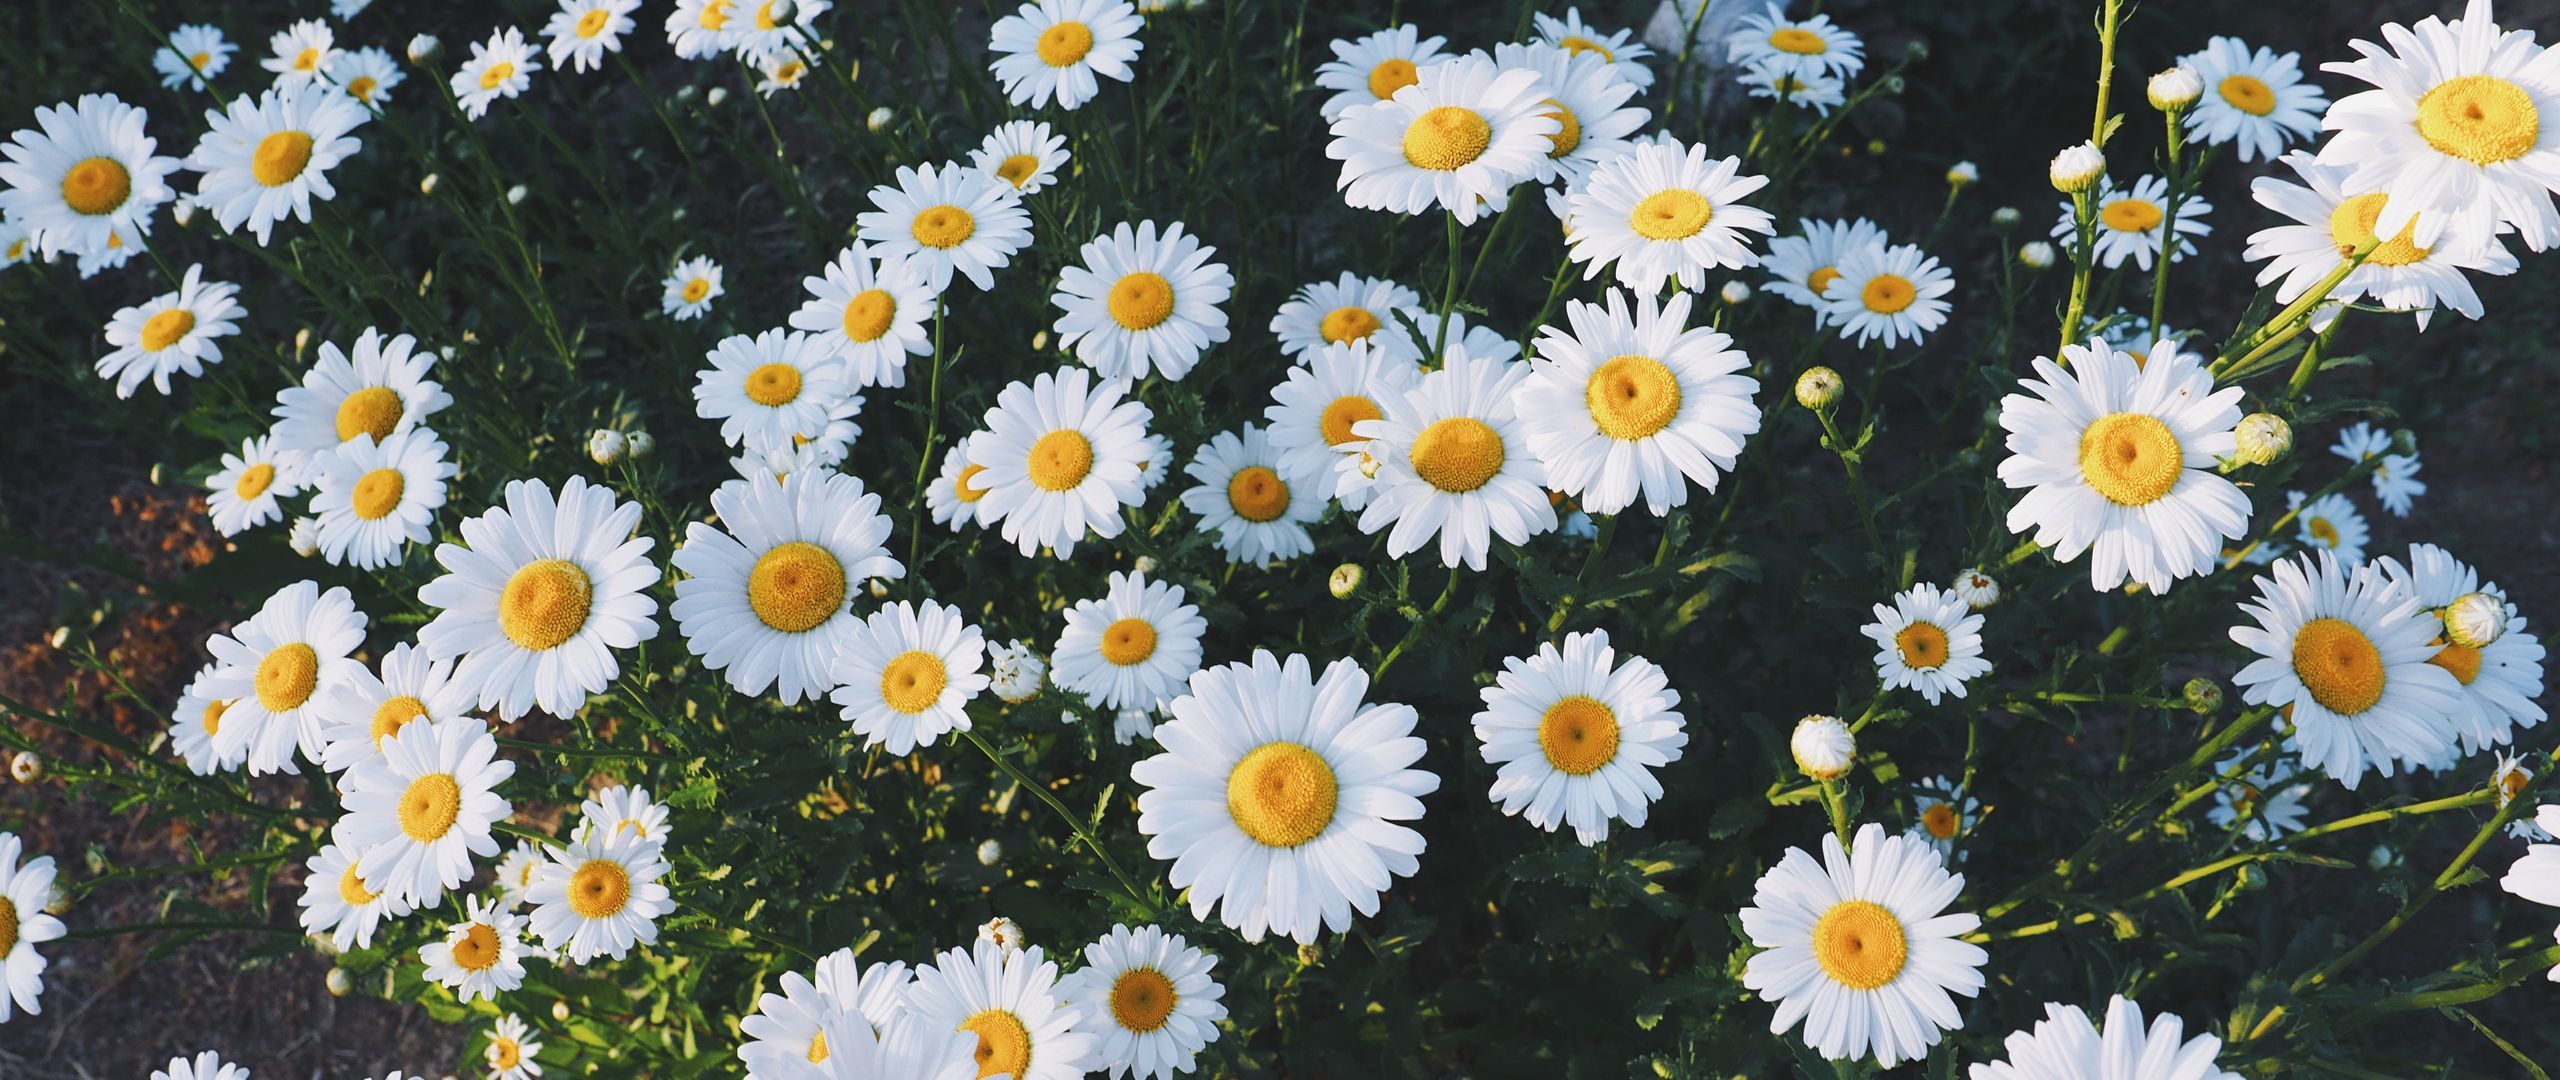 Download wallpaper 2560x1080 daisies, glade, flowers, grass dual wide 1080p HD background